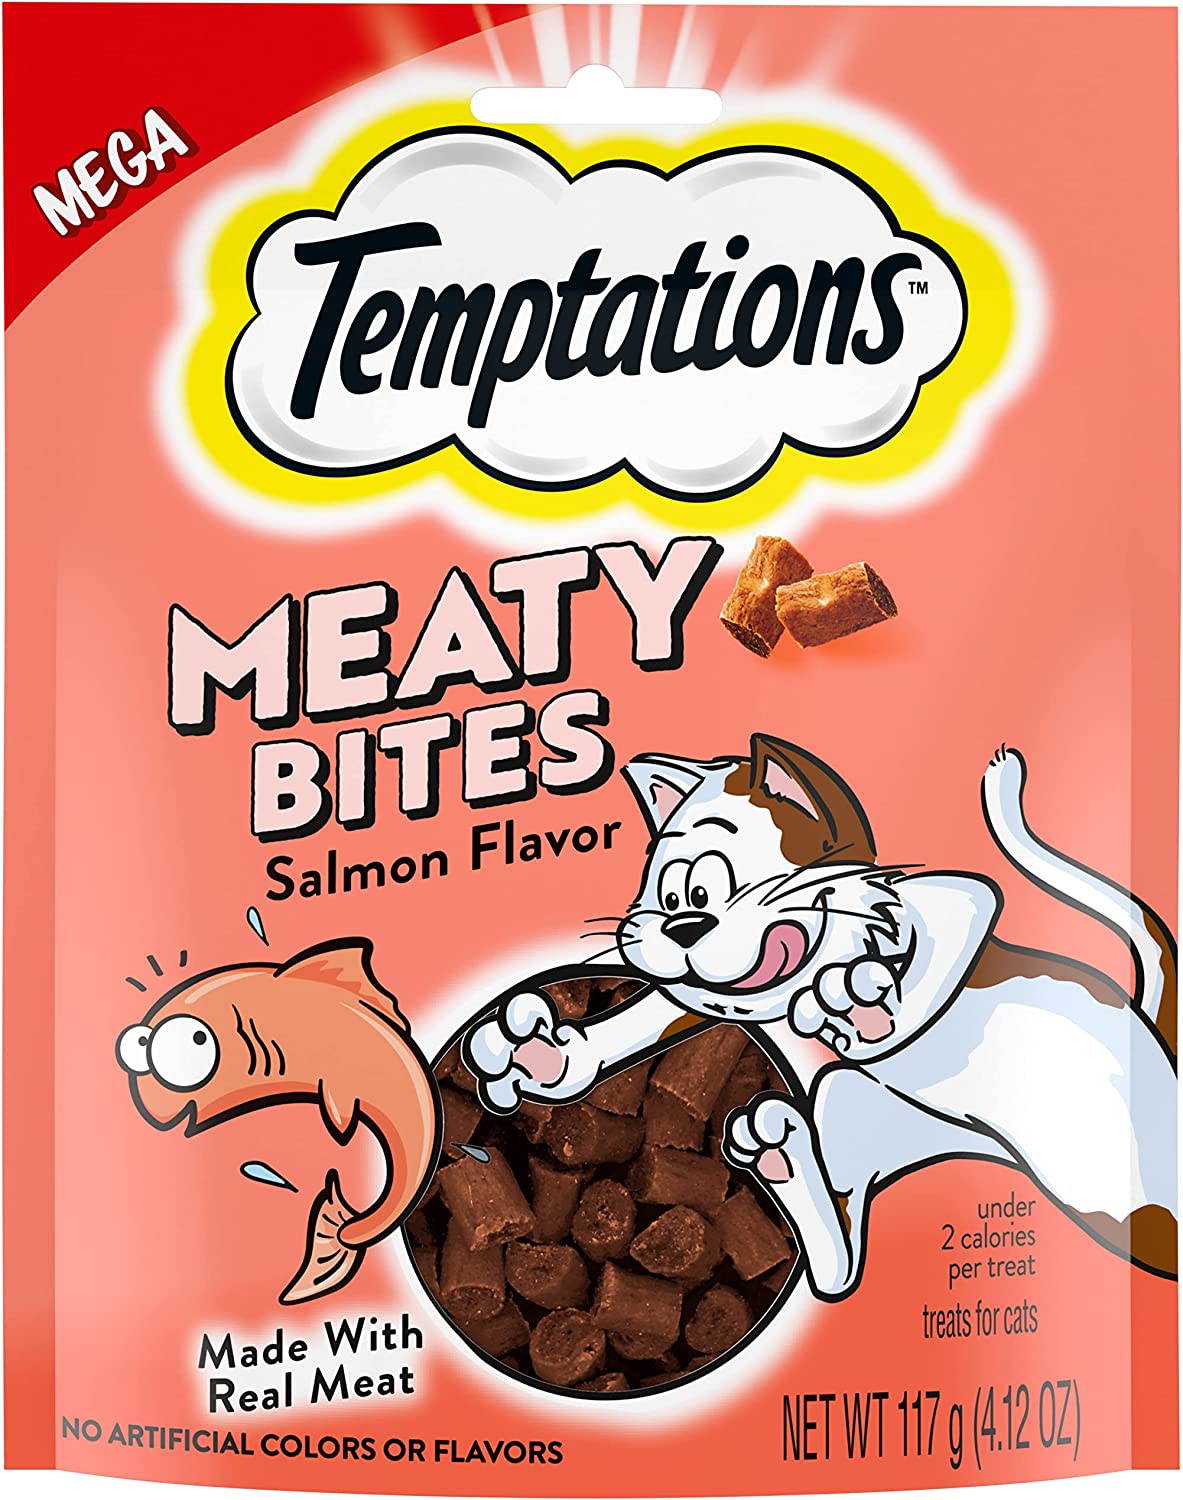 Temptations Meaty Bites, Soft and Savory Cat Treats, Salmon Flavor, 4.12 oz. Pouch